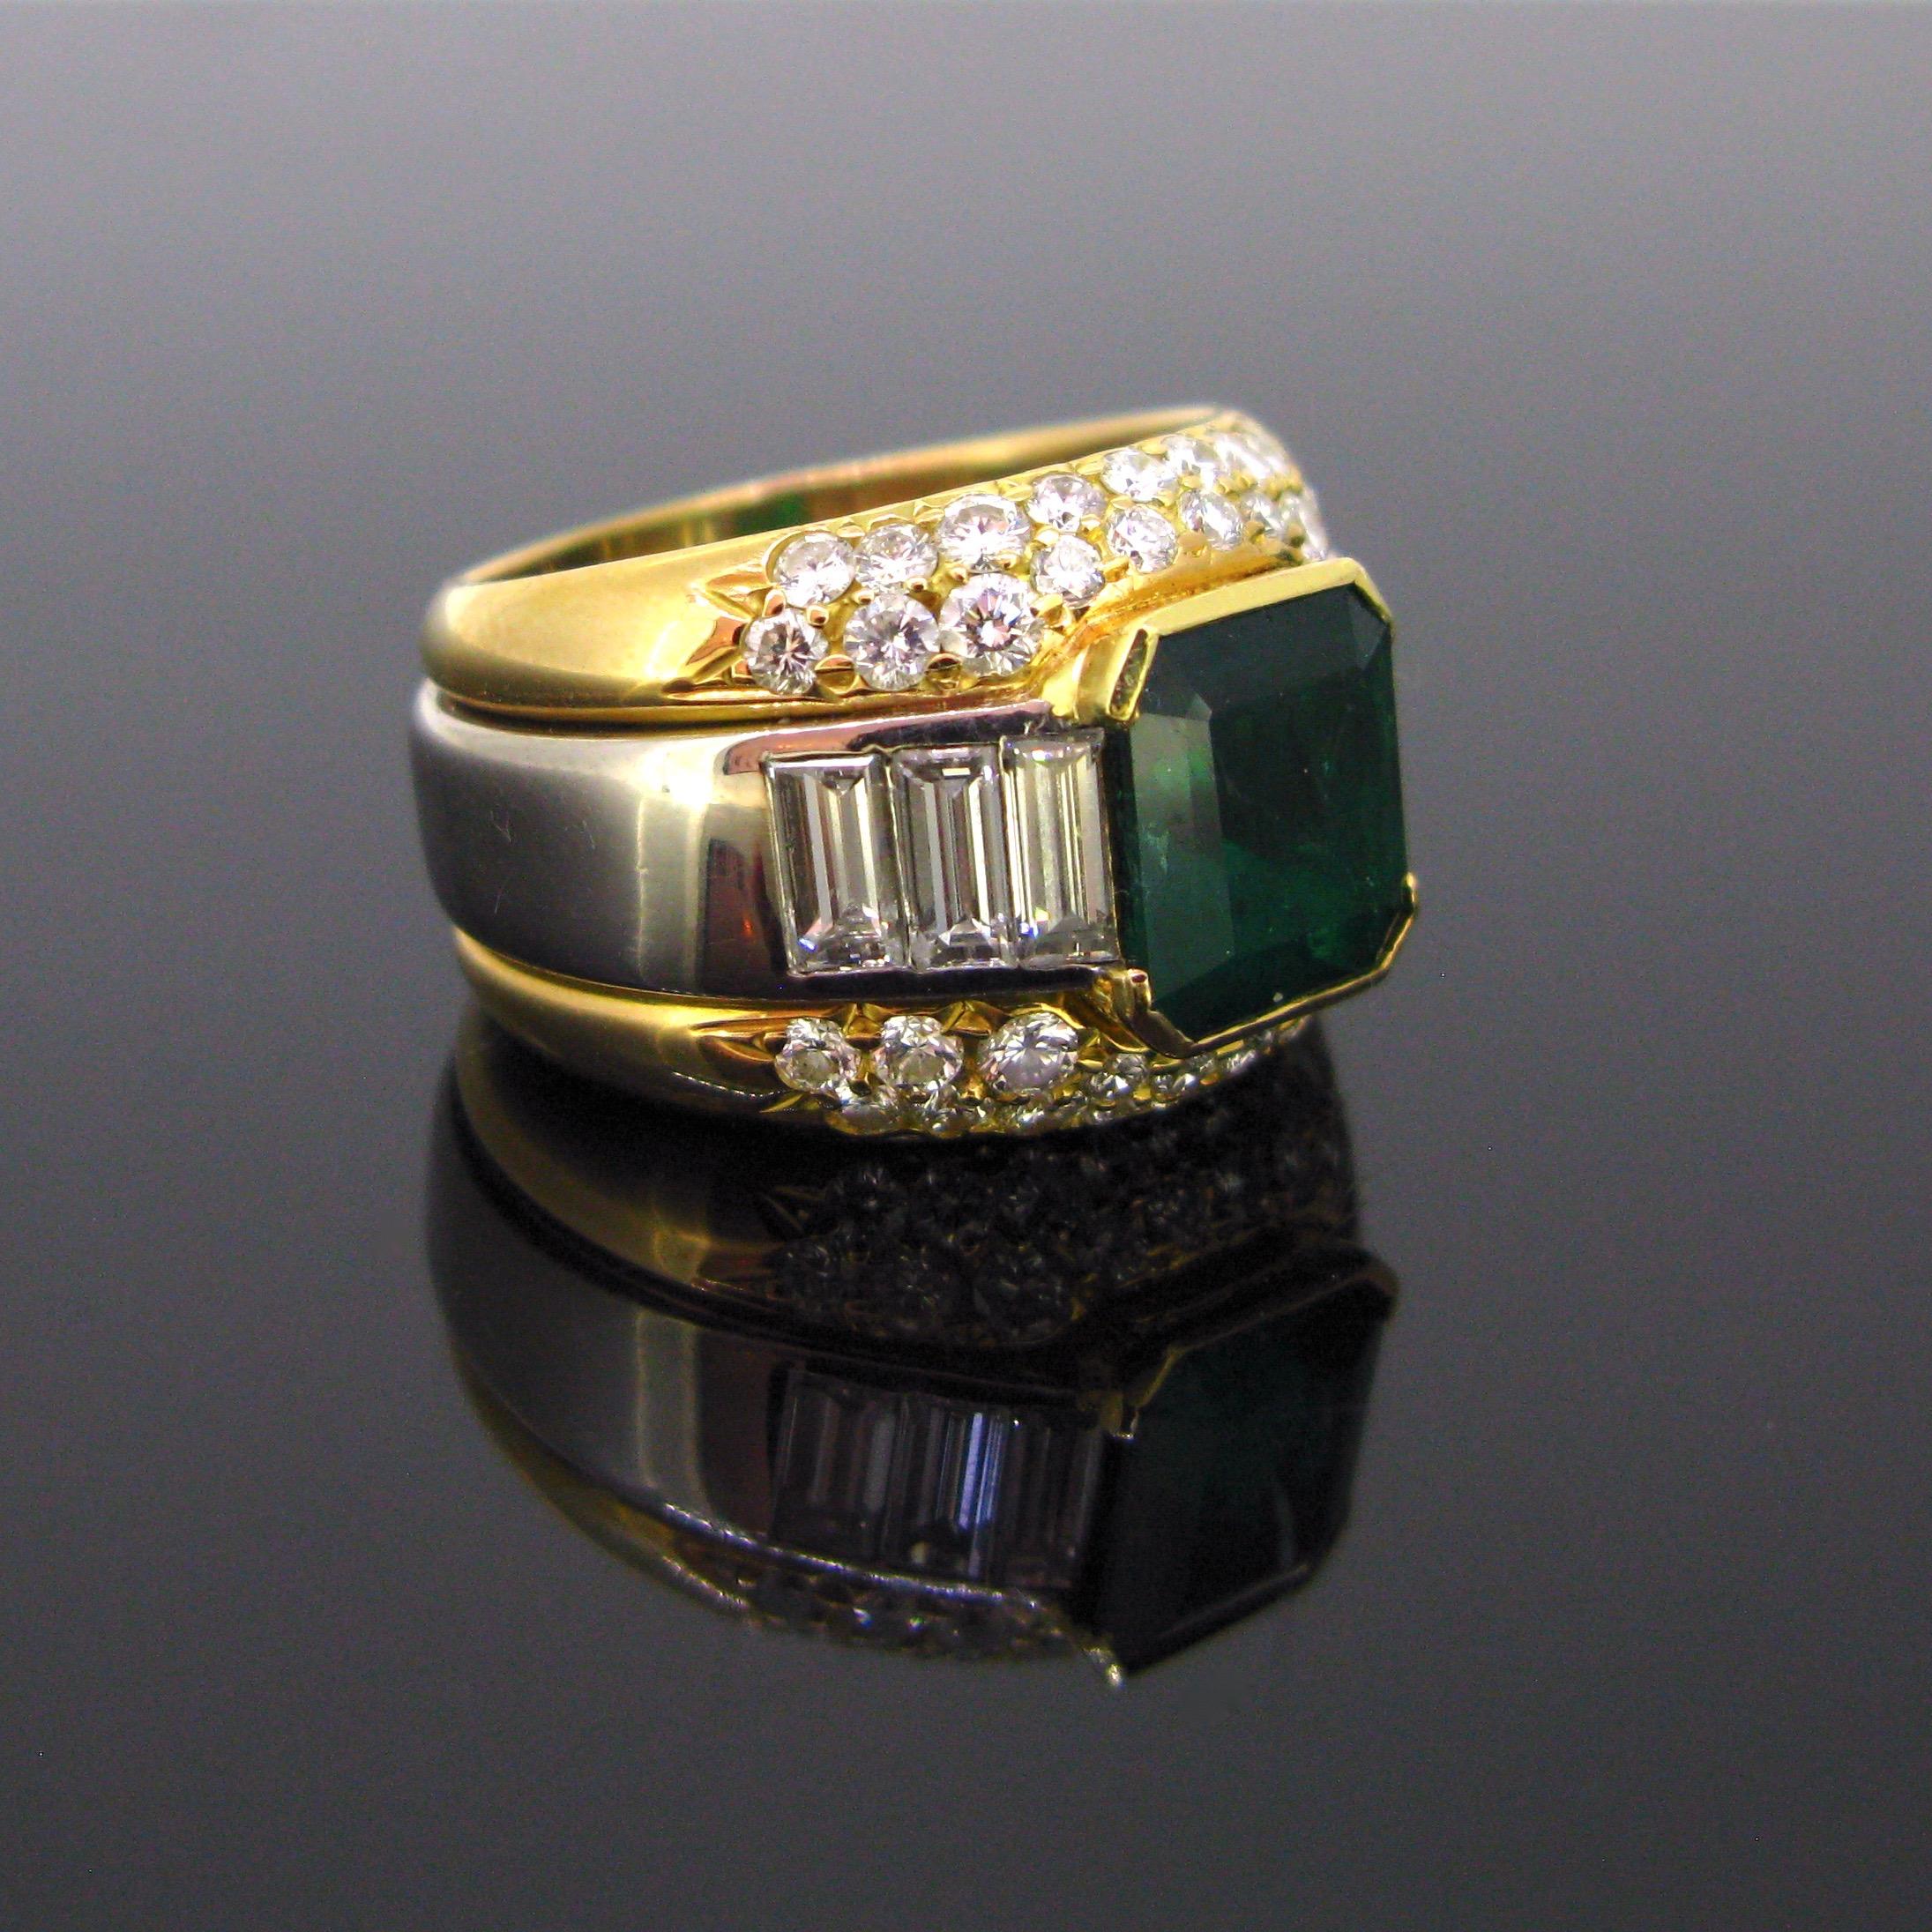 This Cocktail ring features an emerald cut emerald weighing approximately 2.75ct. The emerald has been tested from Colombian – Moderate. The ring is set with three baguette cut diamonds on each side, each weighing around 0.20ct and it is also